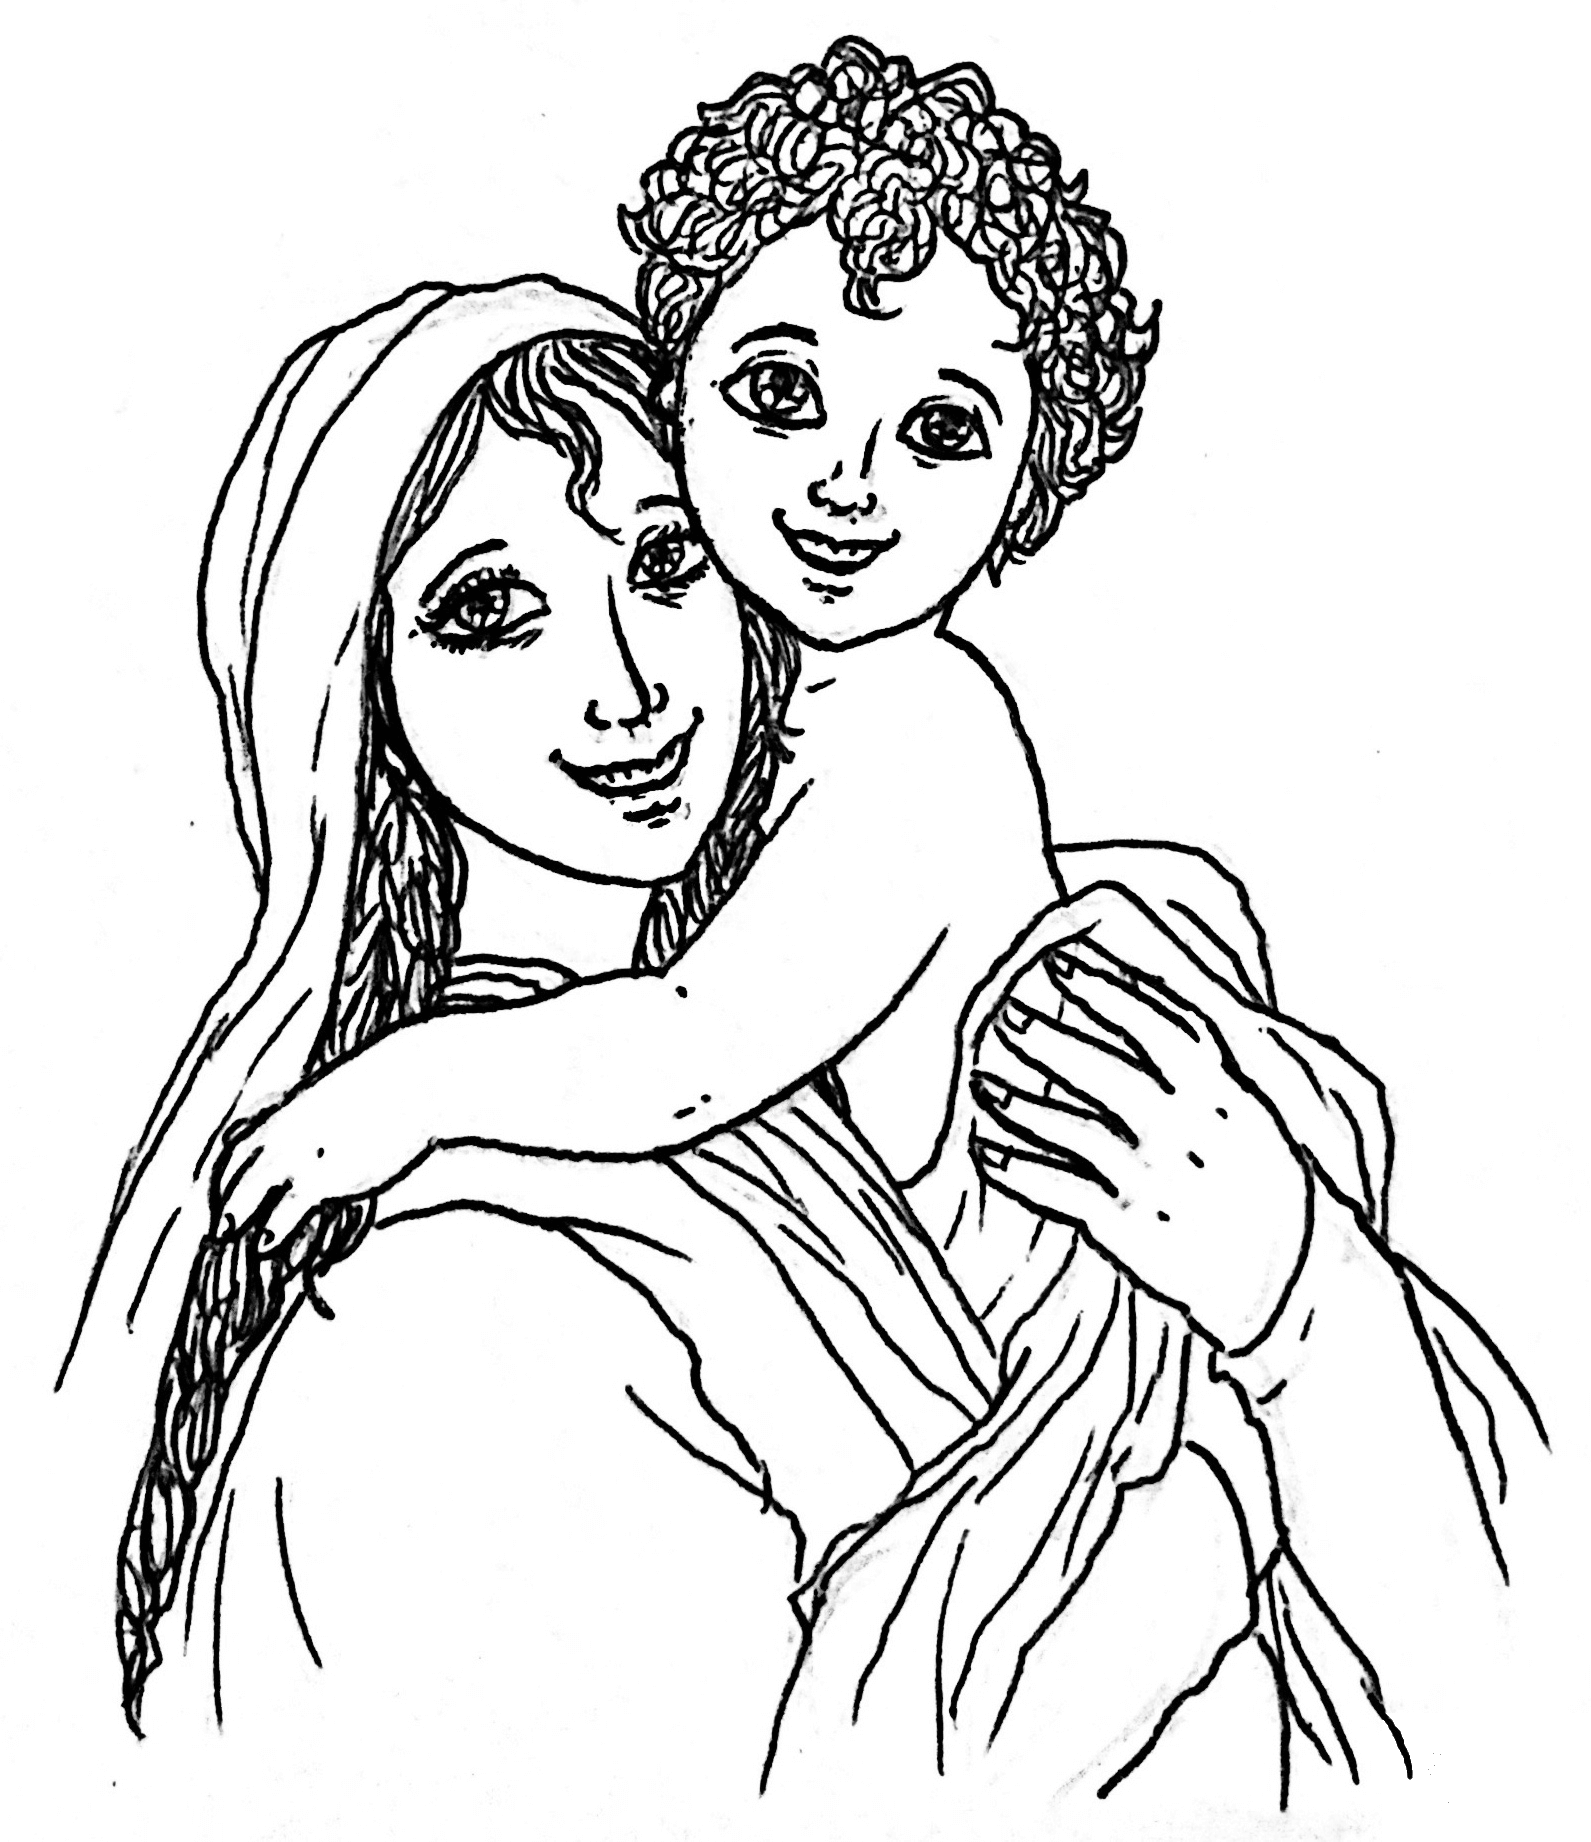 Mary Hugging Jesus Christ coloring page - ColouringPages